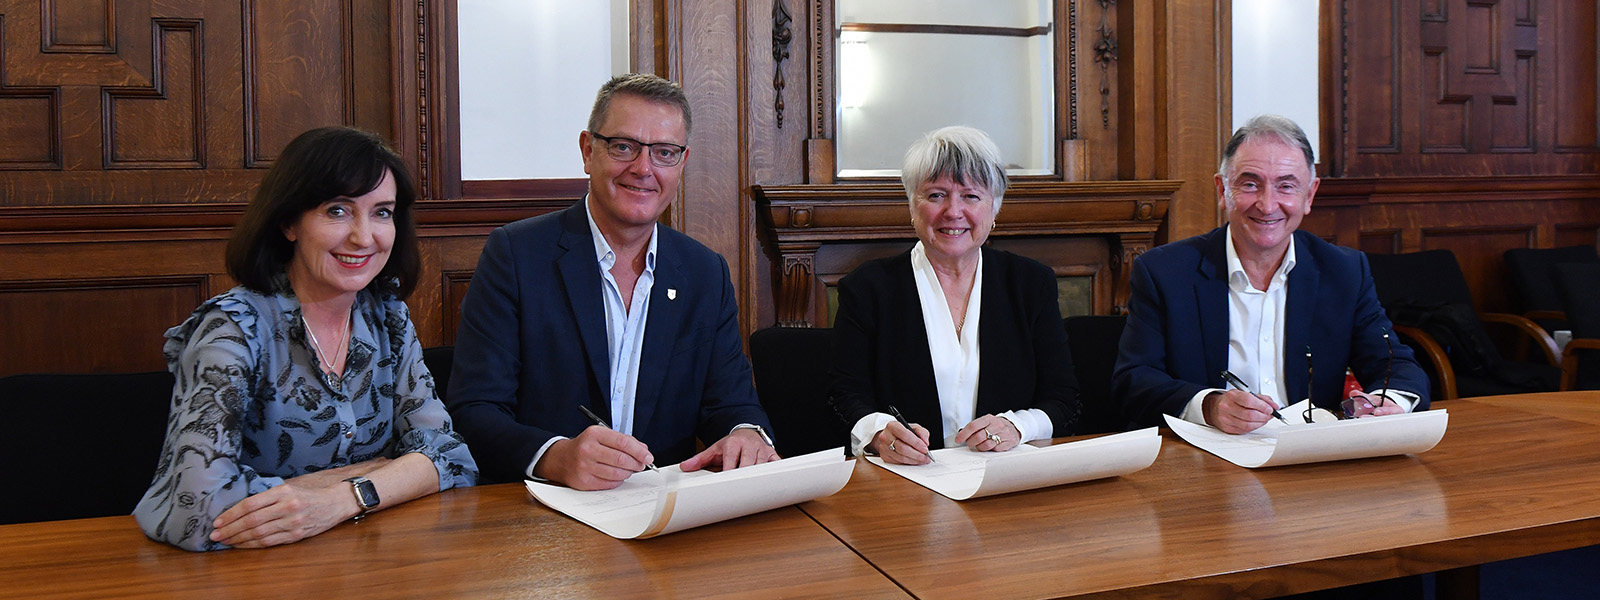 The official signatories of the MoU between Strathclyde and Flinders University & BAE Systems